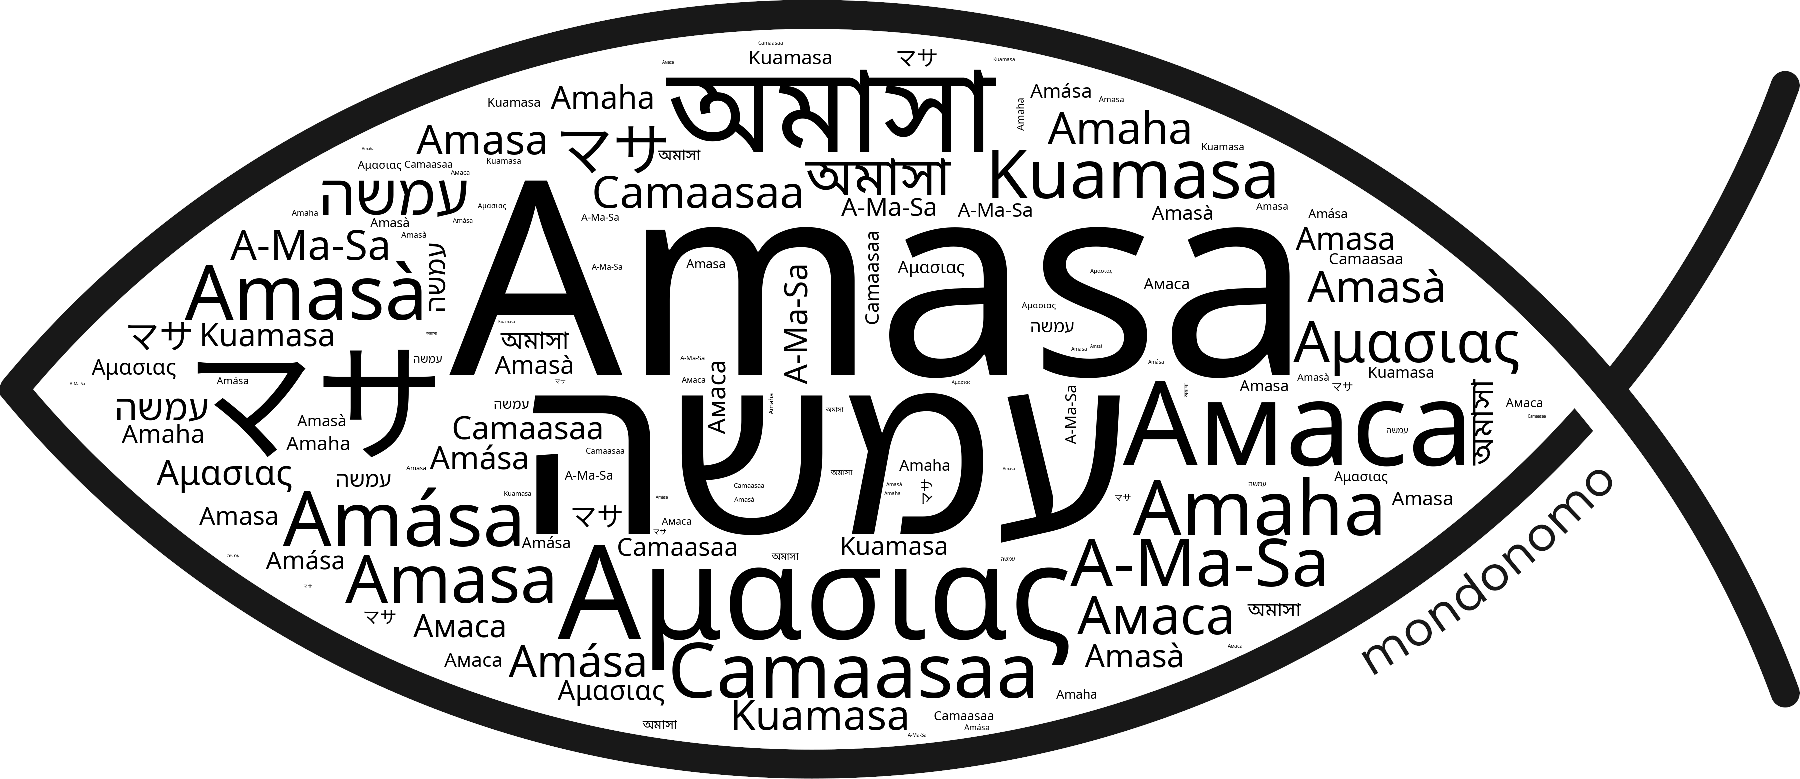 Name Amasa in the world's Bibles